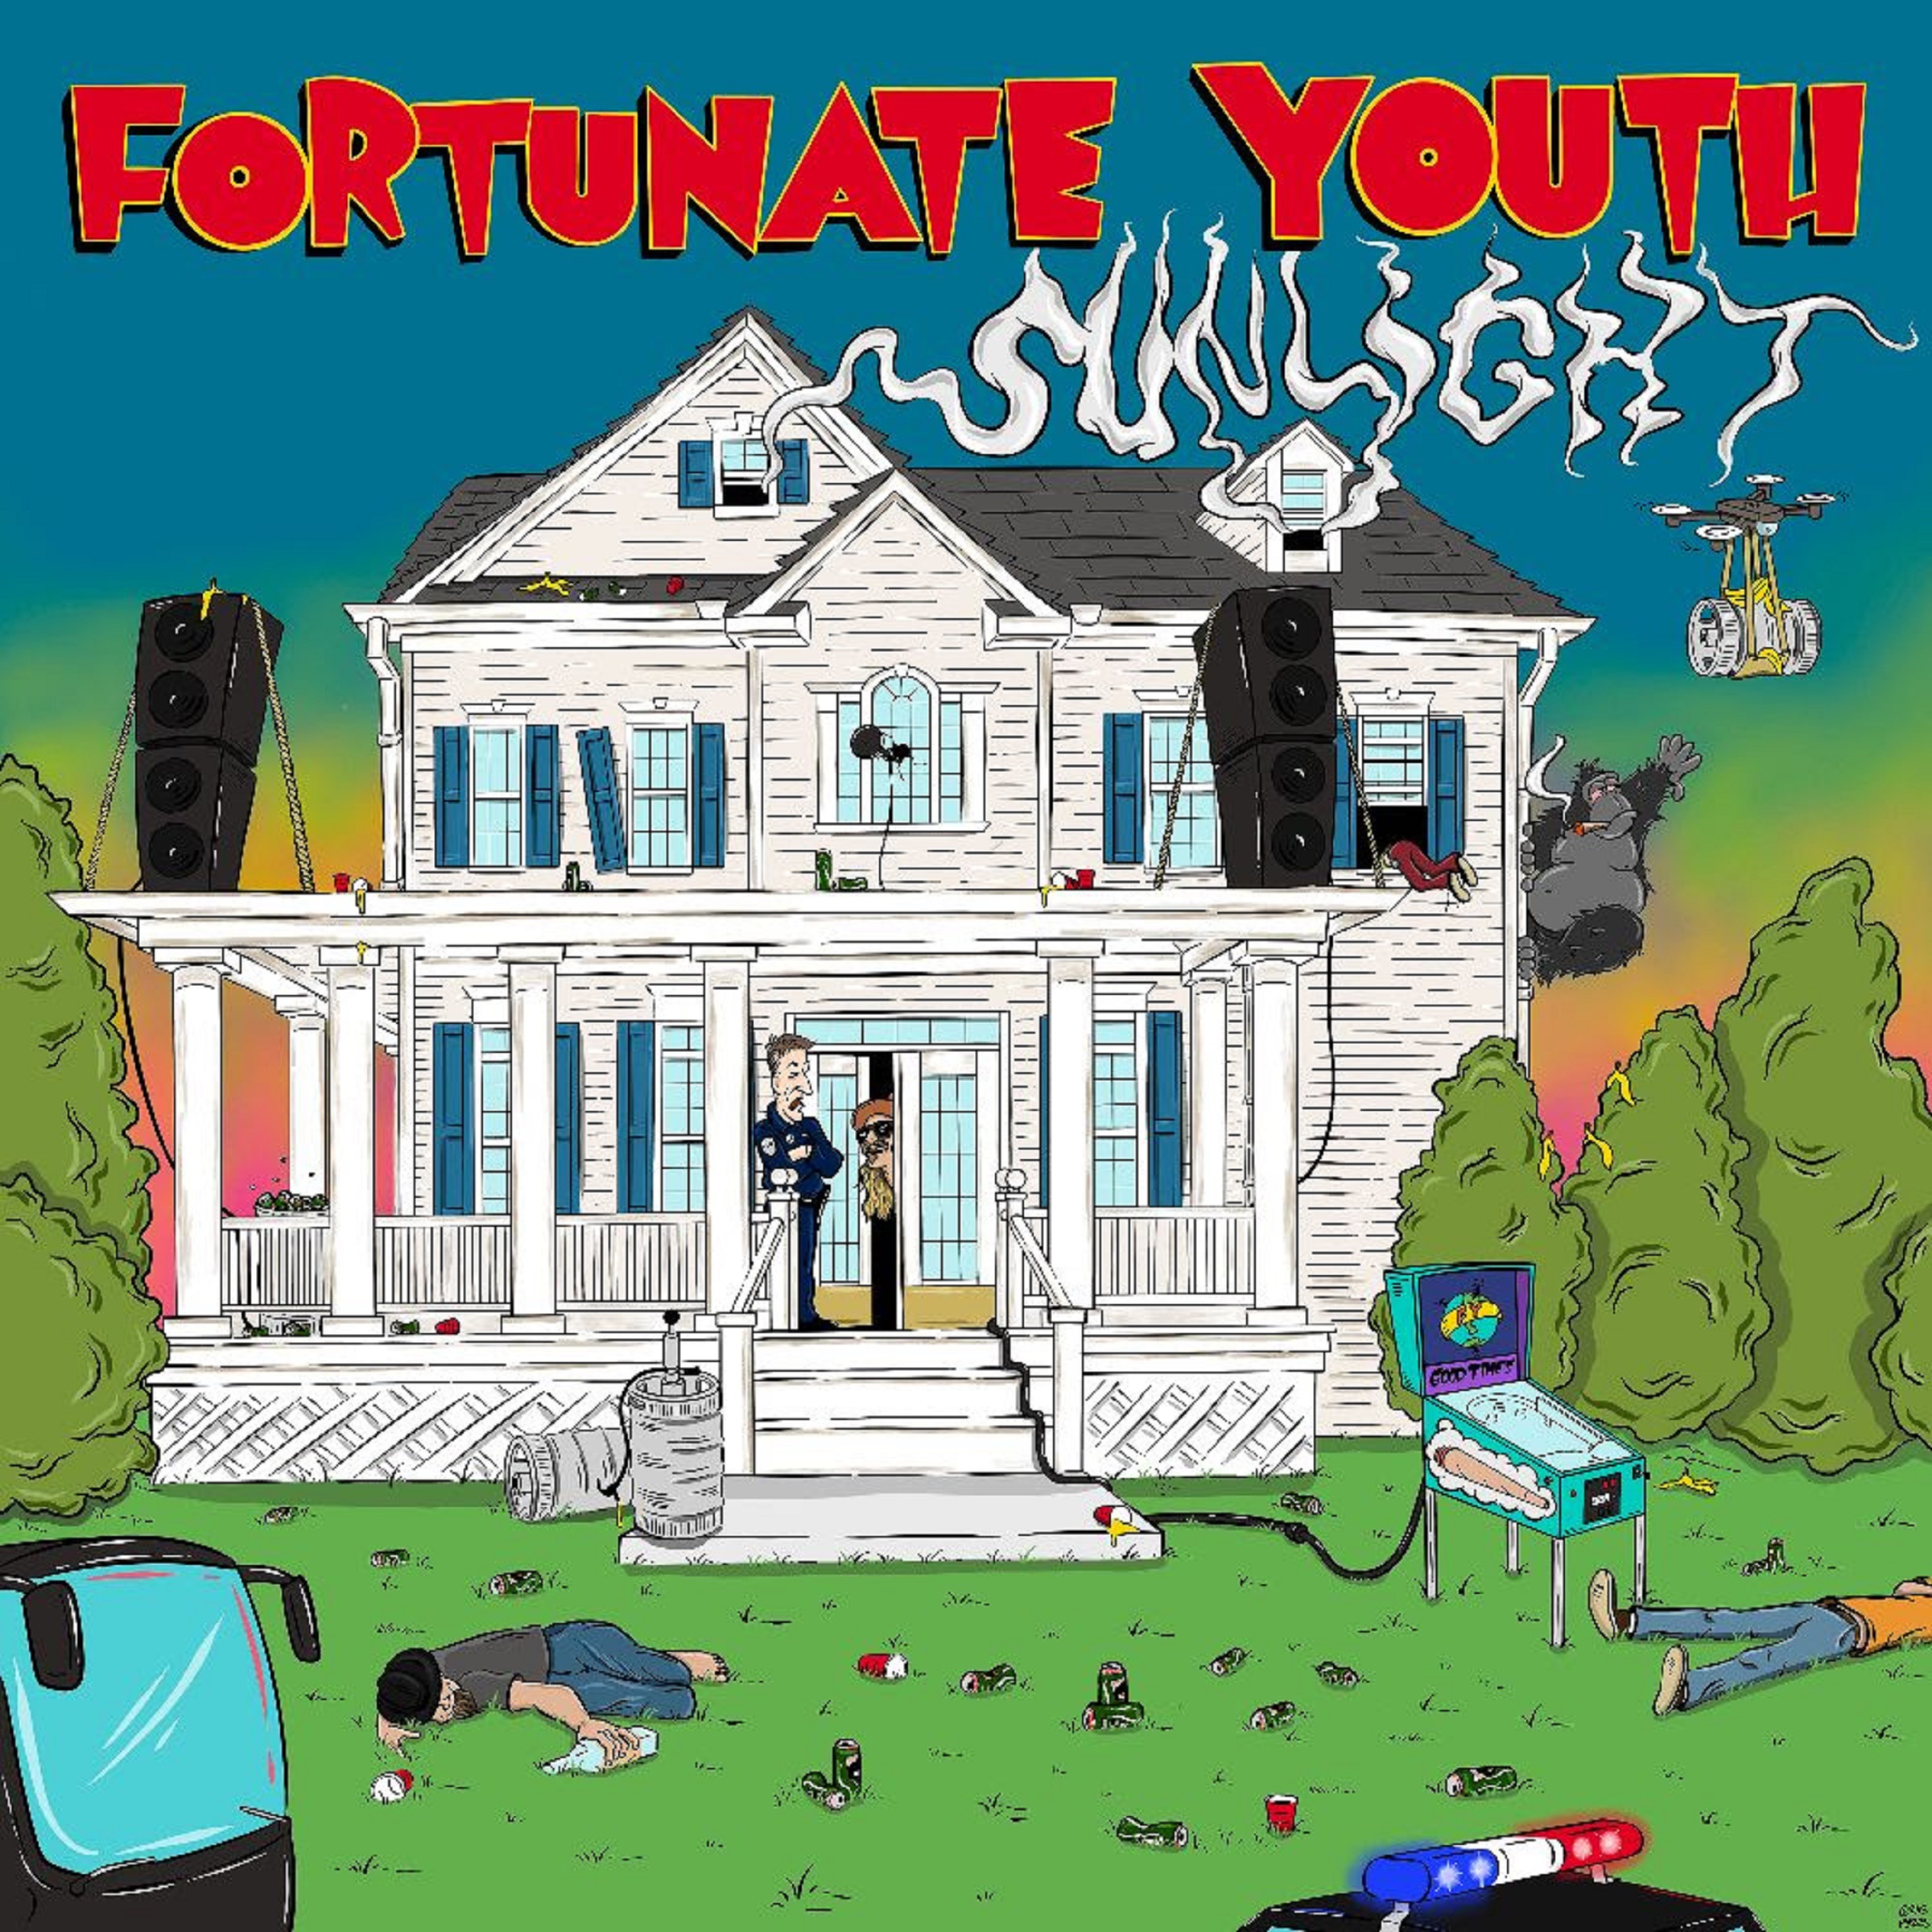 Fortunate Youth Drops 'Sunlight' Today Ahead New Album